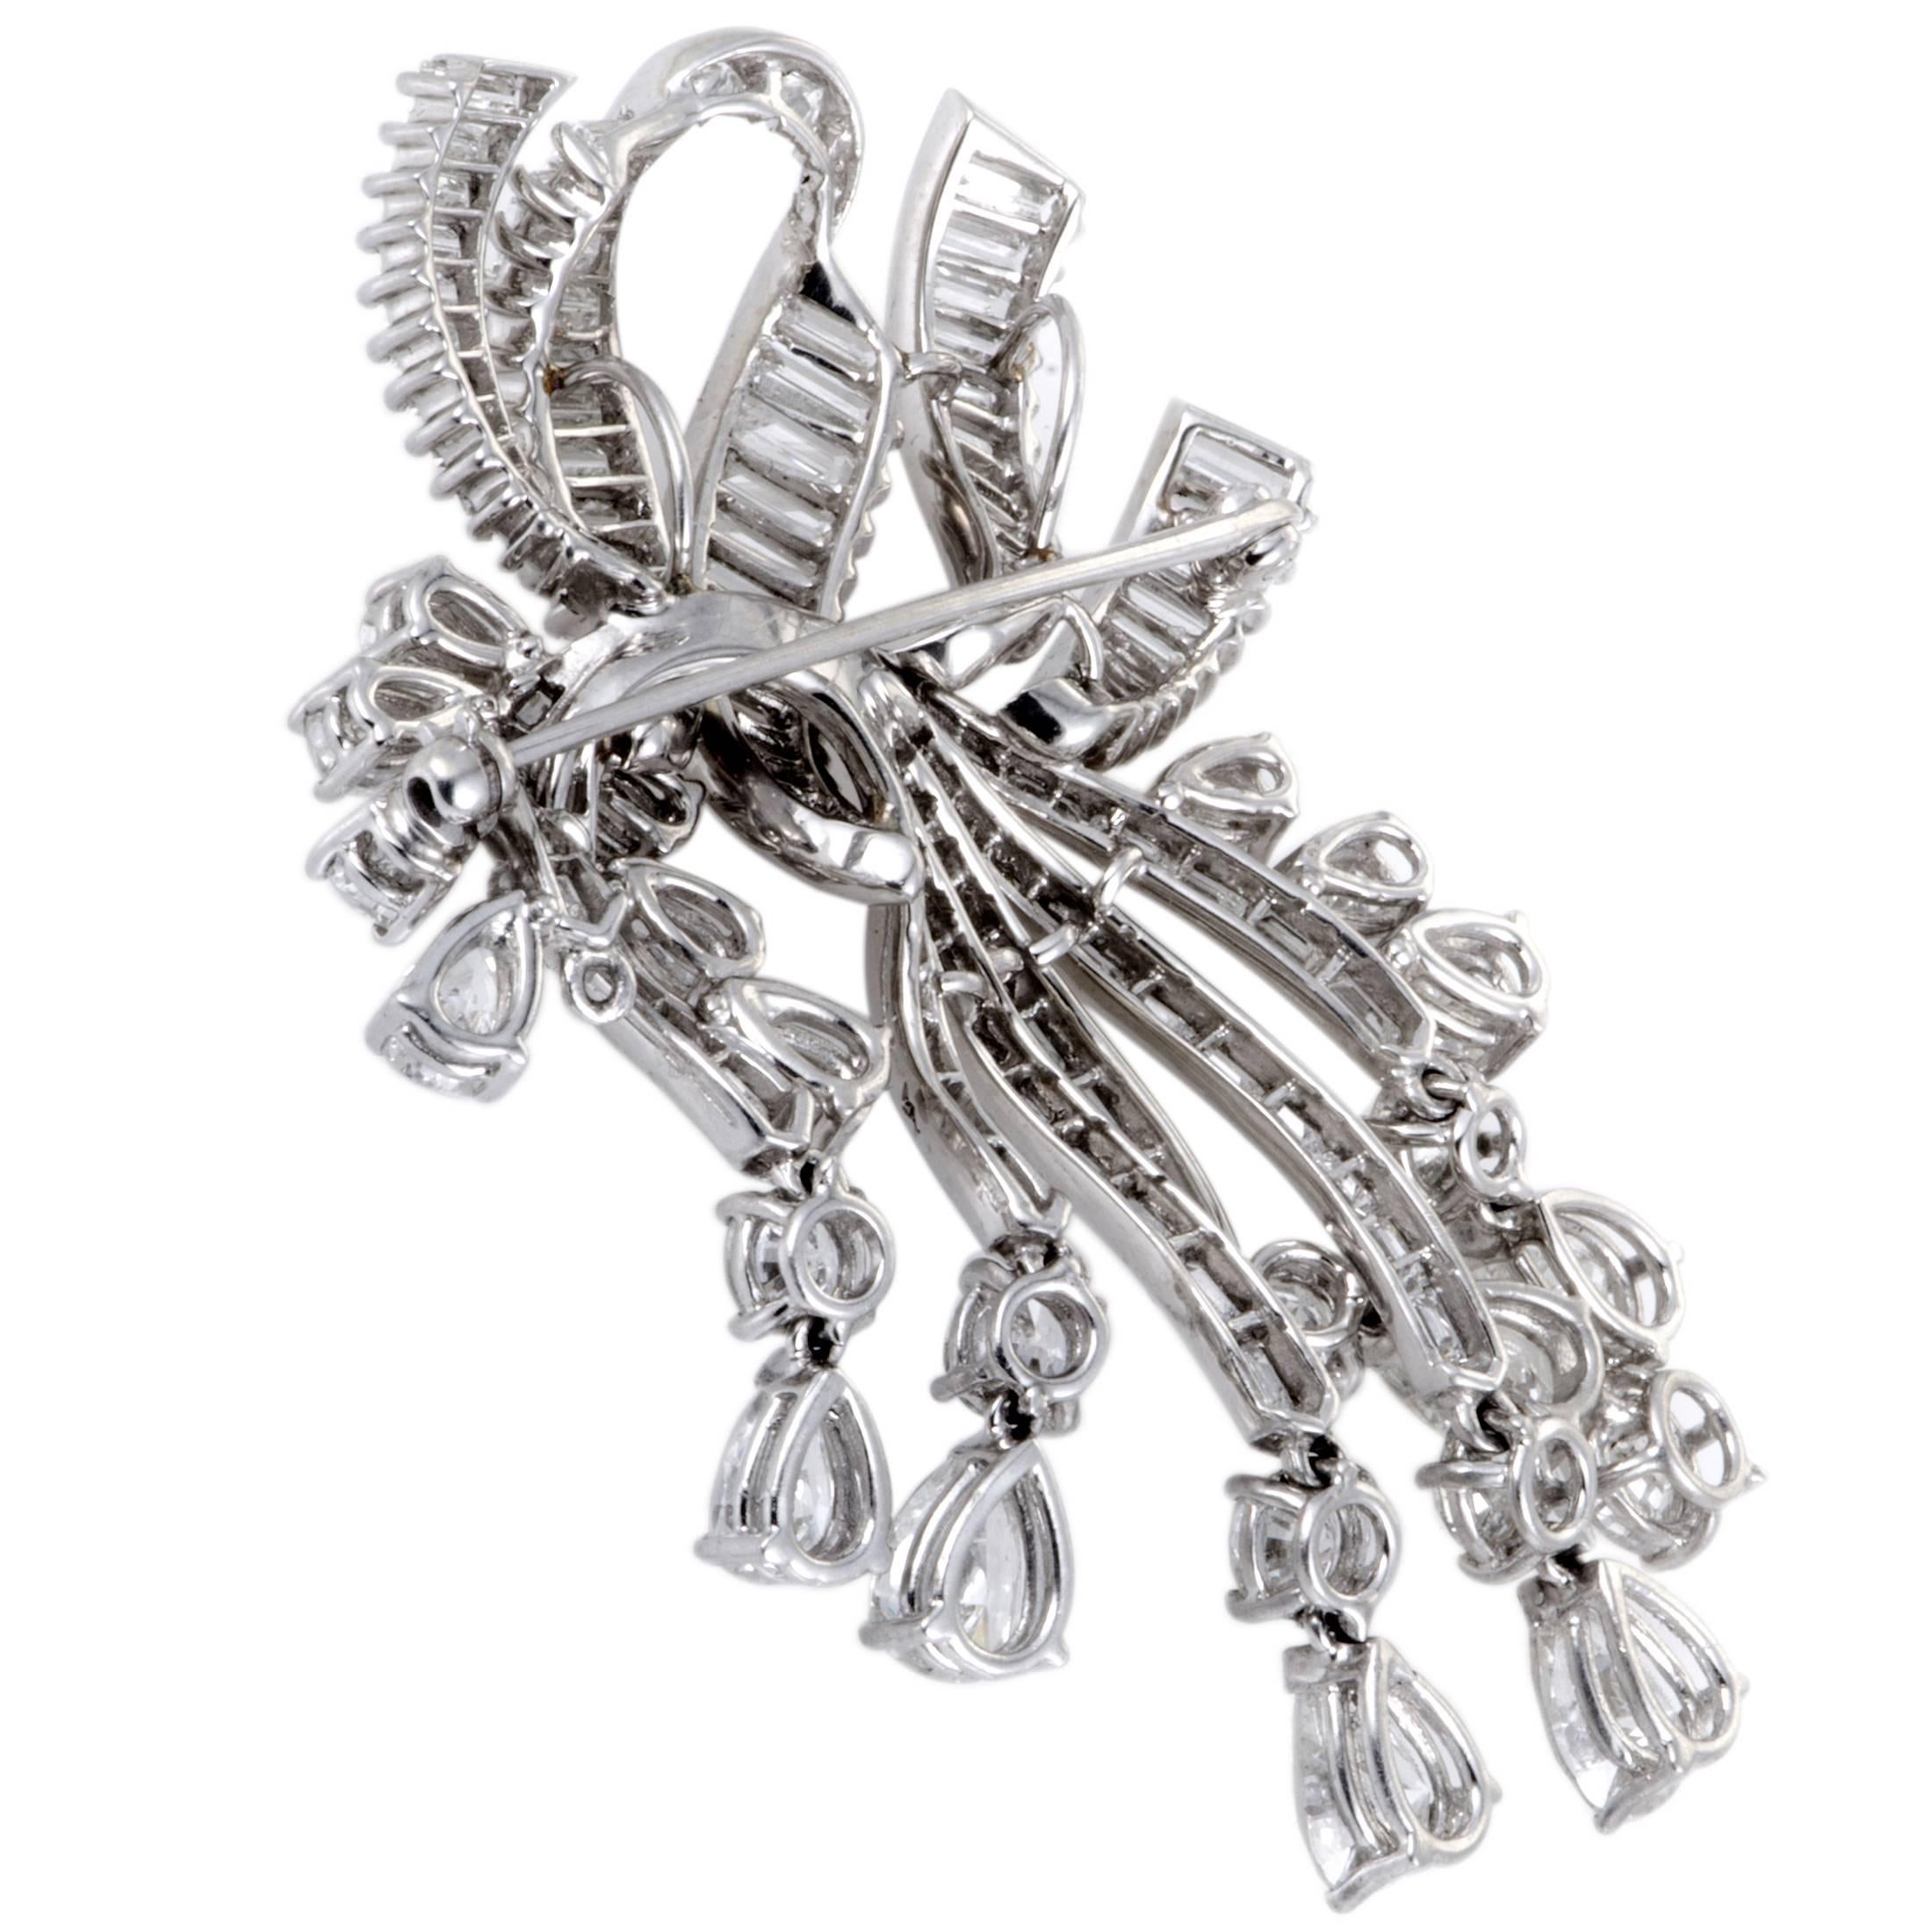 Masterfully crafted from prestigious platinum and lavishly decorated with a plethora of scintillating diamond stones, this dazzling brooch boasts an exceptionally luxurious appeal. The brooch is set with a total of approximately 22.00 carats of